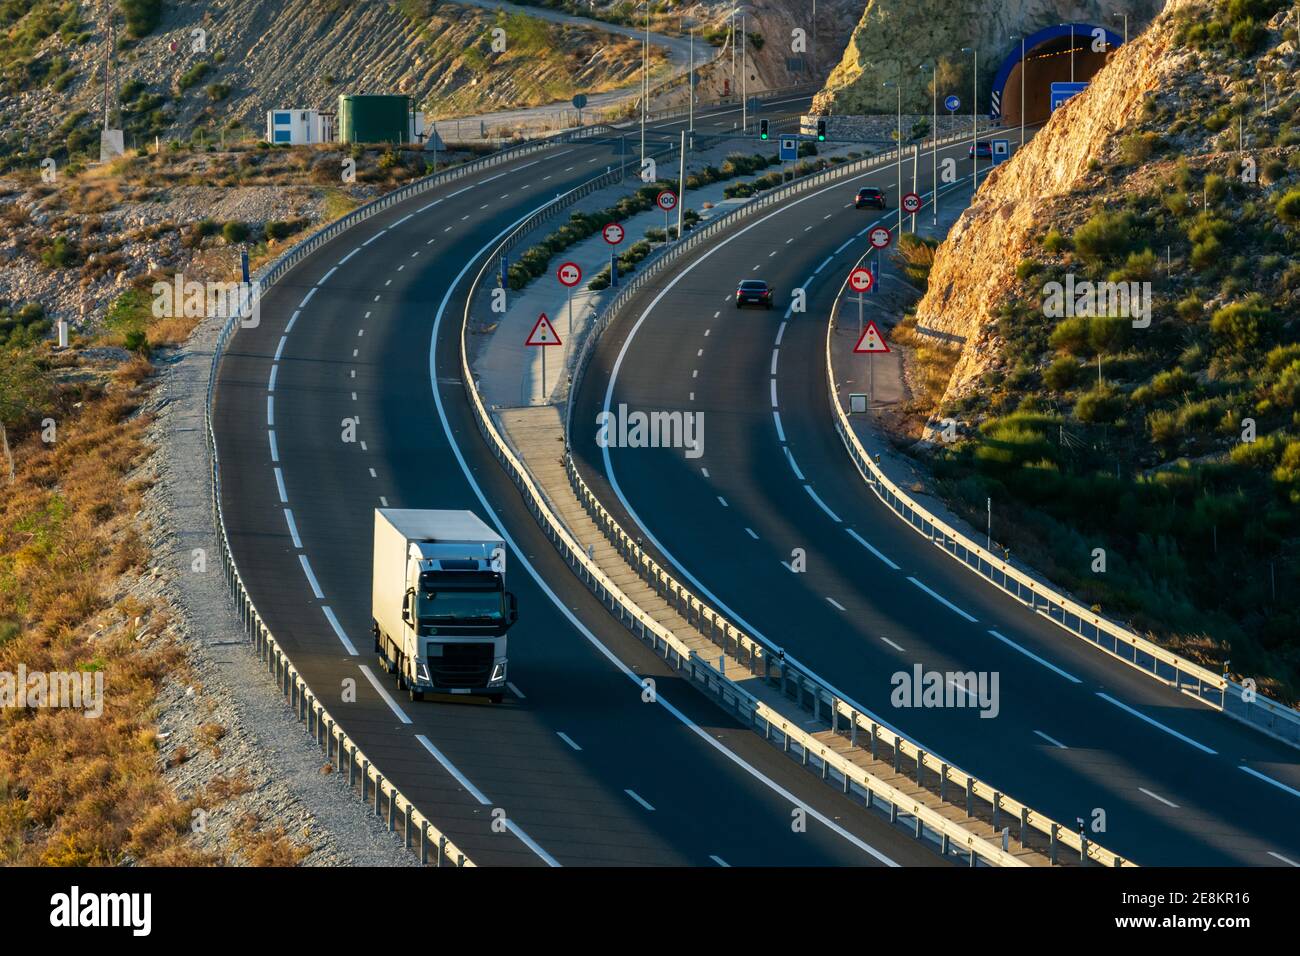 Highway at the exit of a tunnel with a truck and several cars circulating. Stock Photo